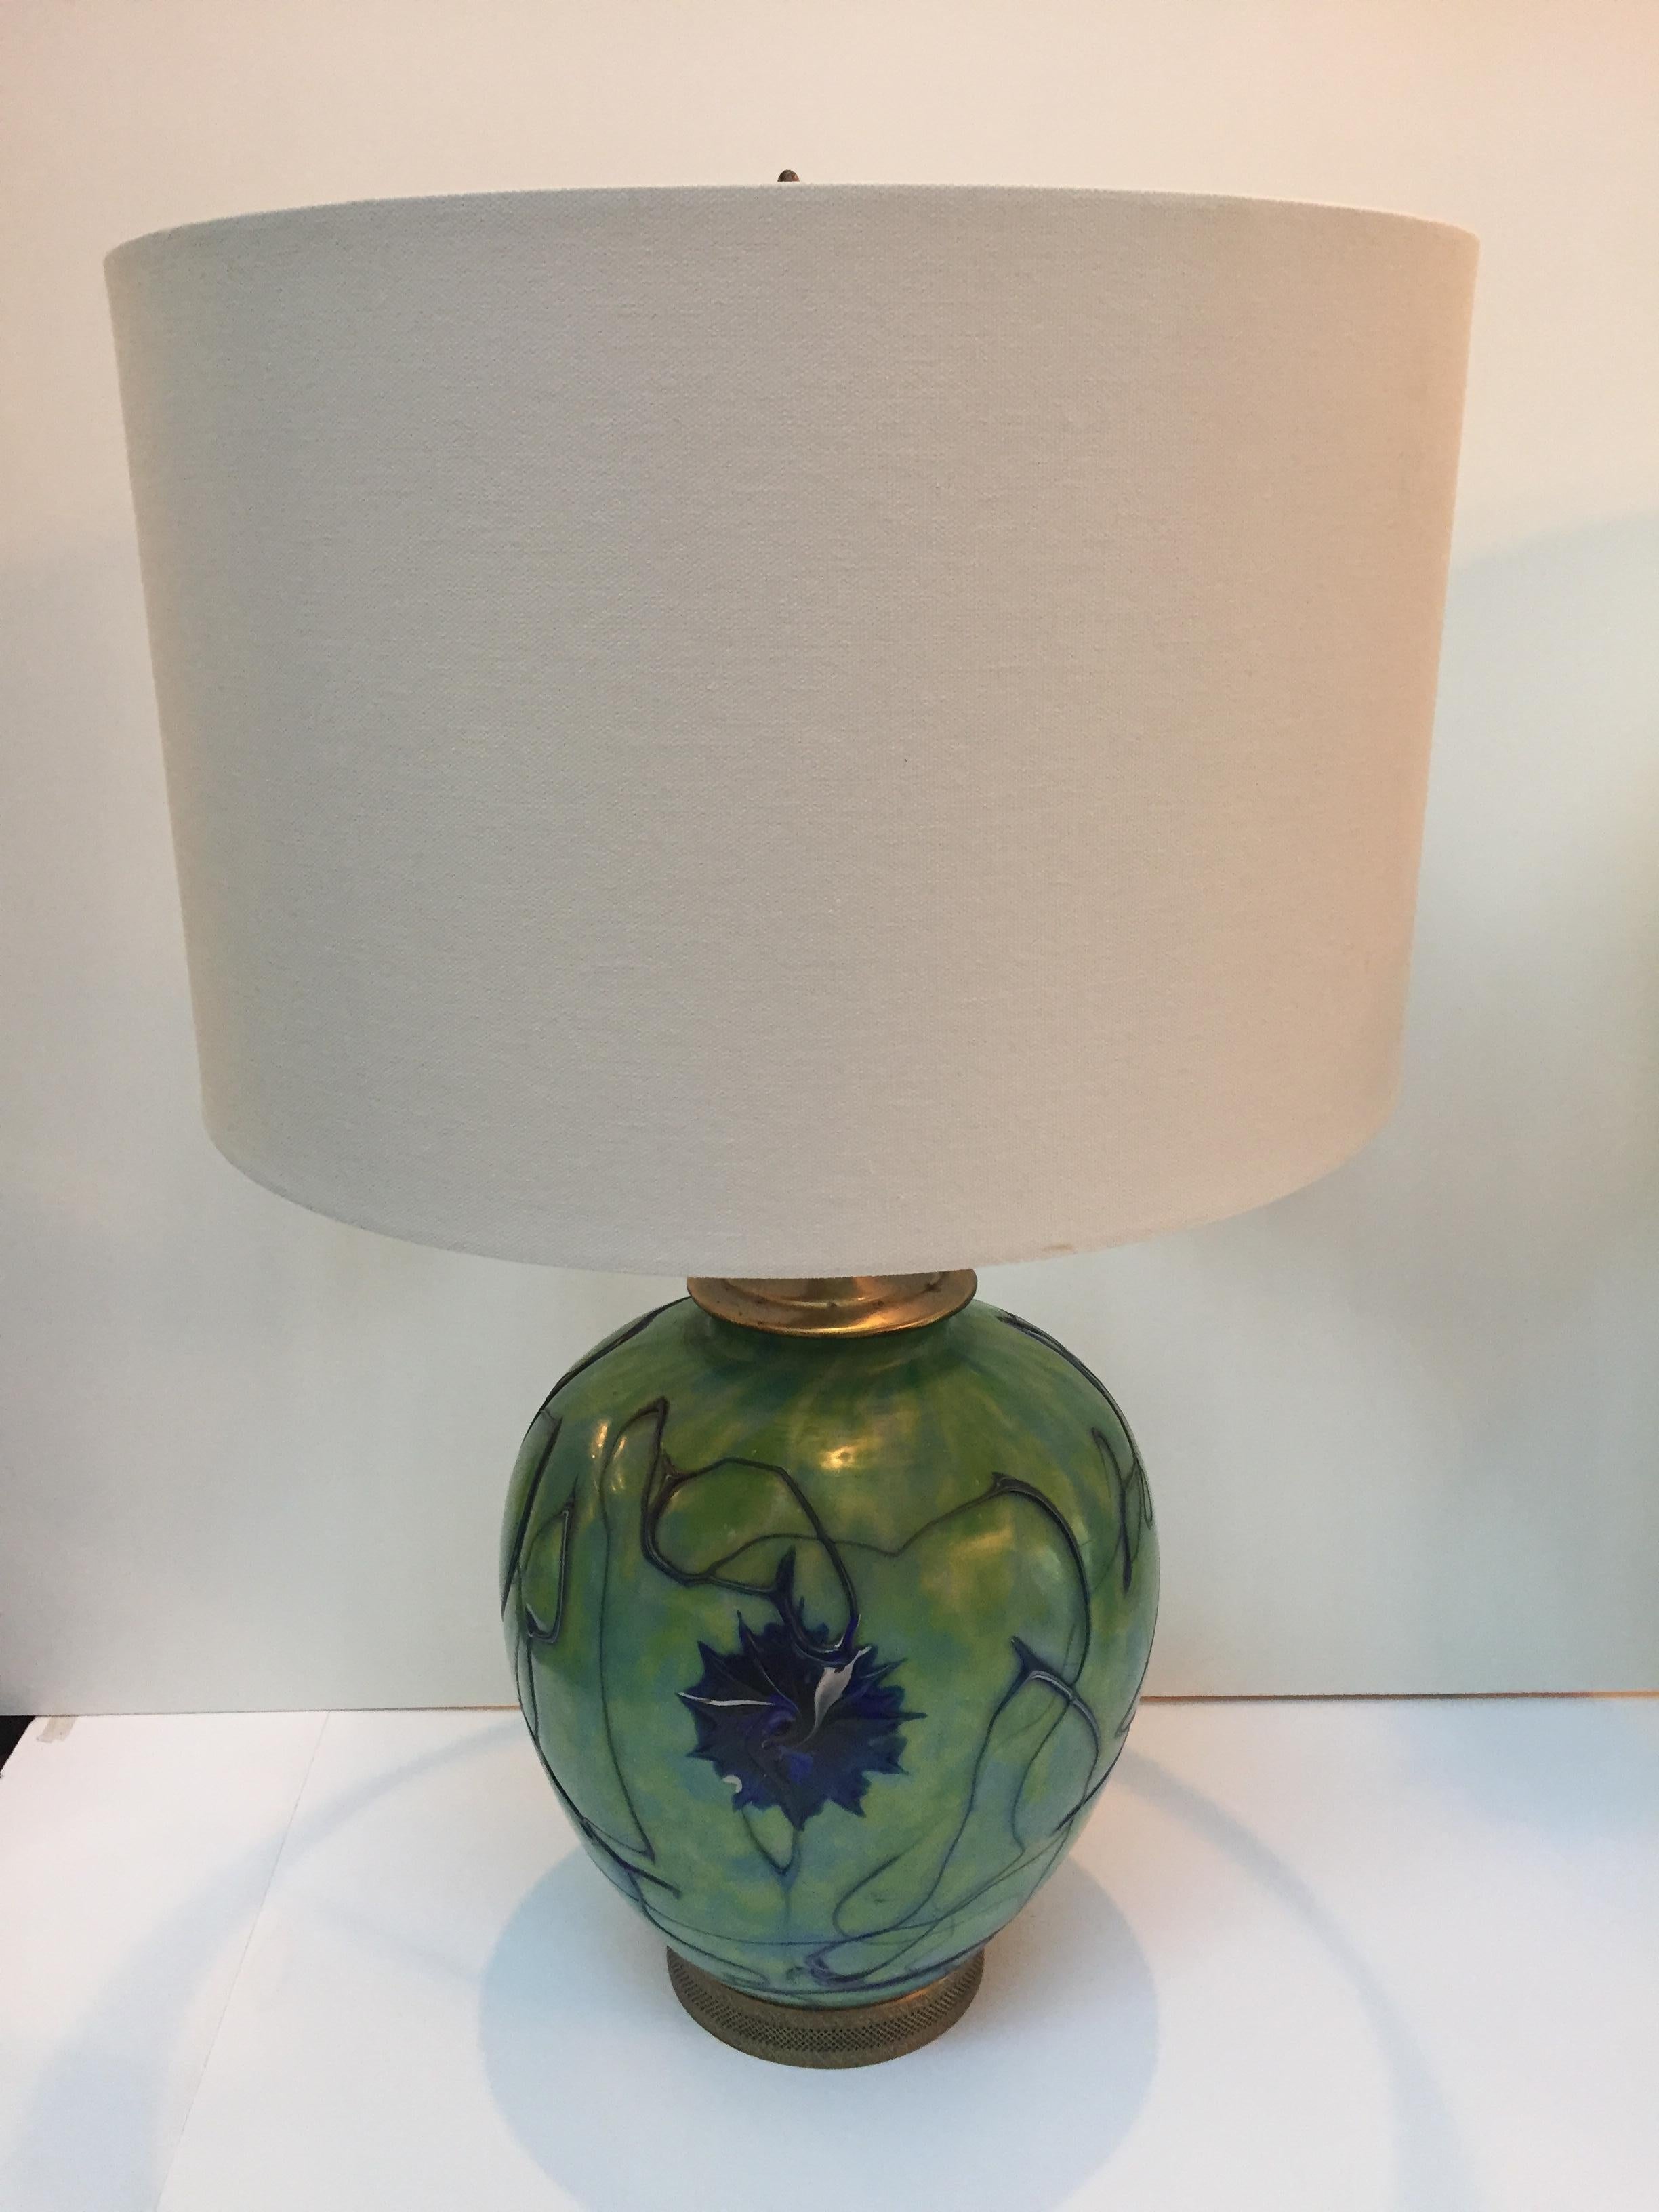 Pair of Pallme-Koenlg glass vases turned into lamps, having an Art Nouveau style and collectible iridized green glass with abstract glass trails in dark blue that wind around the circumference in a lyrical manner. 
Measures: 17 inches high to top